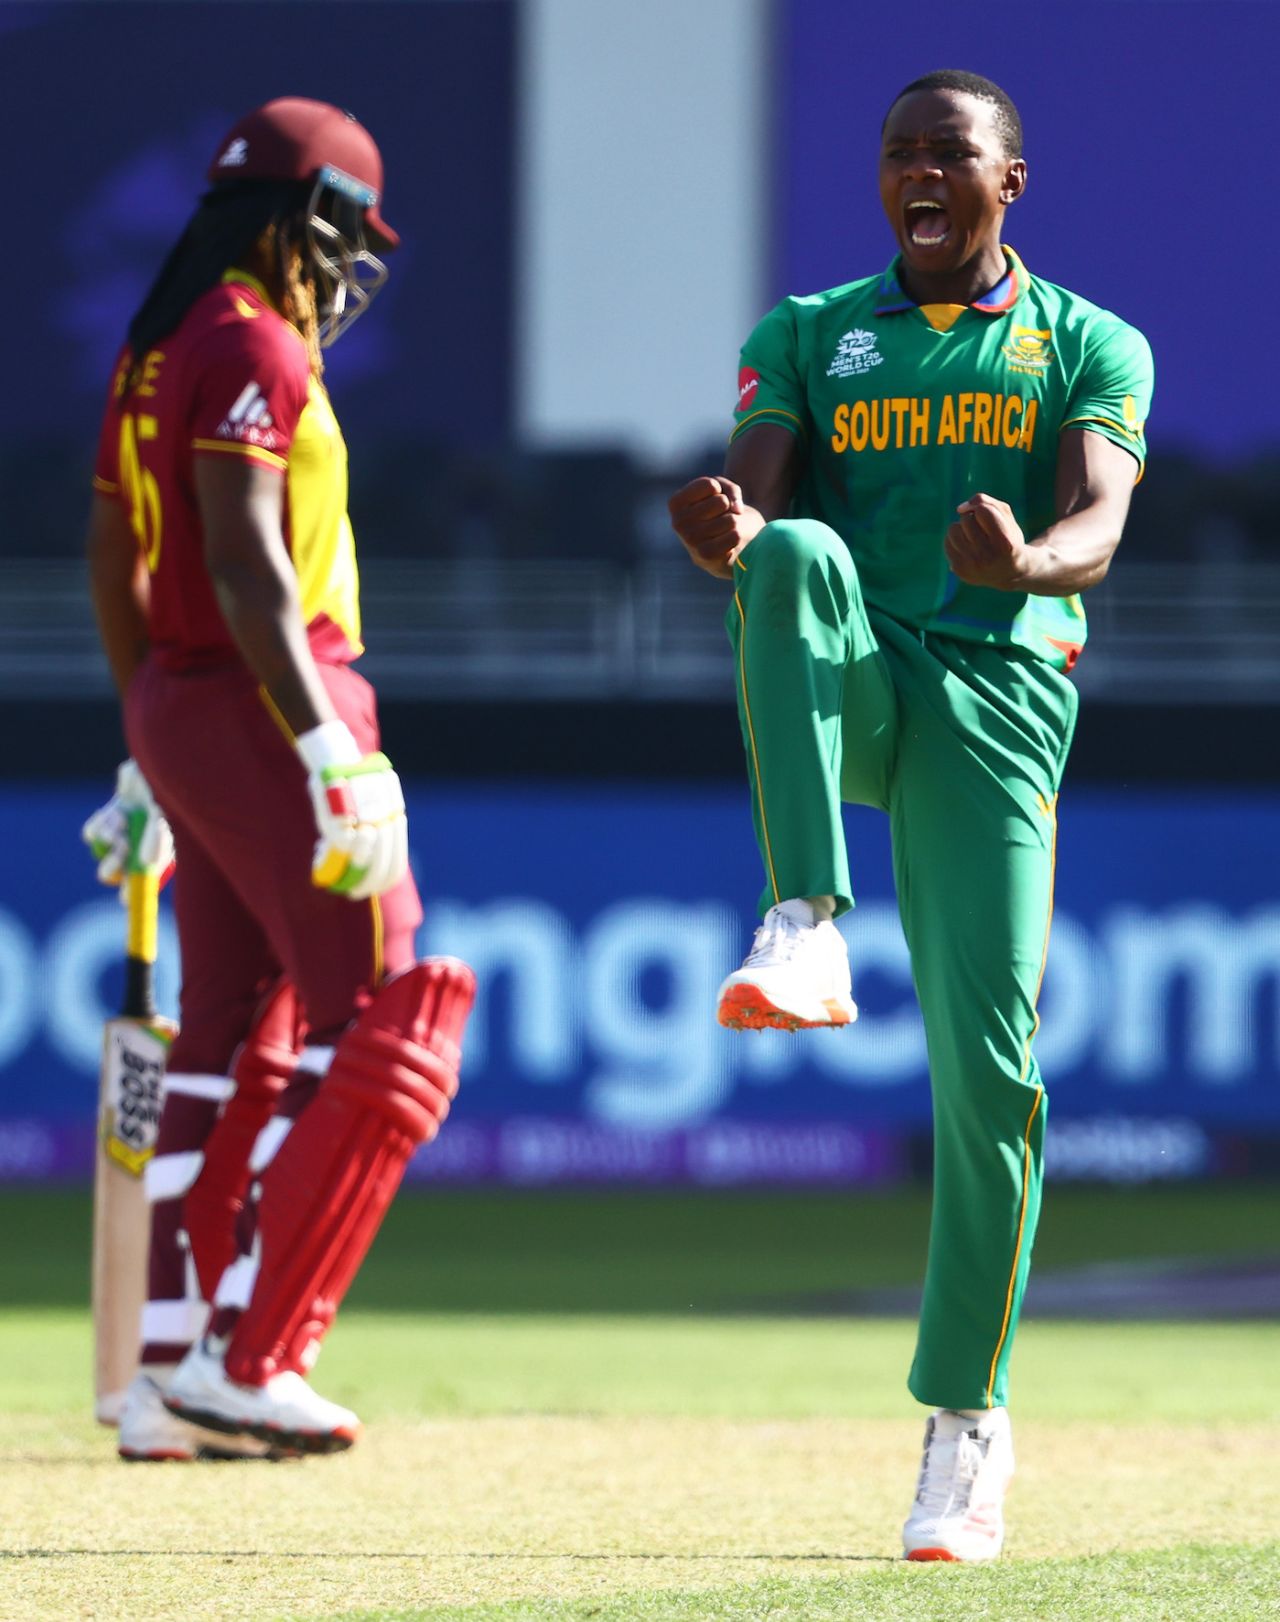 Kagiso Rabada is over the moon after sending back Lendl Simmons, South Africa vs West Indies, T20 World Cup, Group 1, Dubai, October 26, 2021